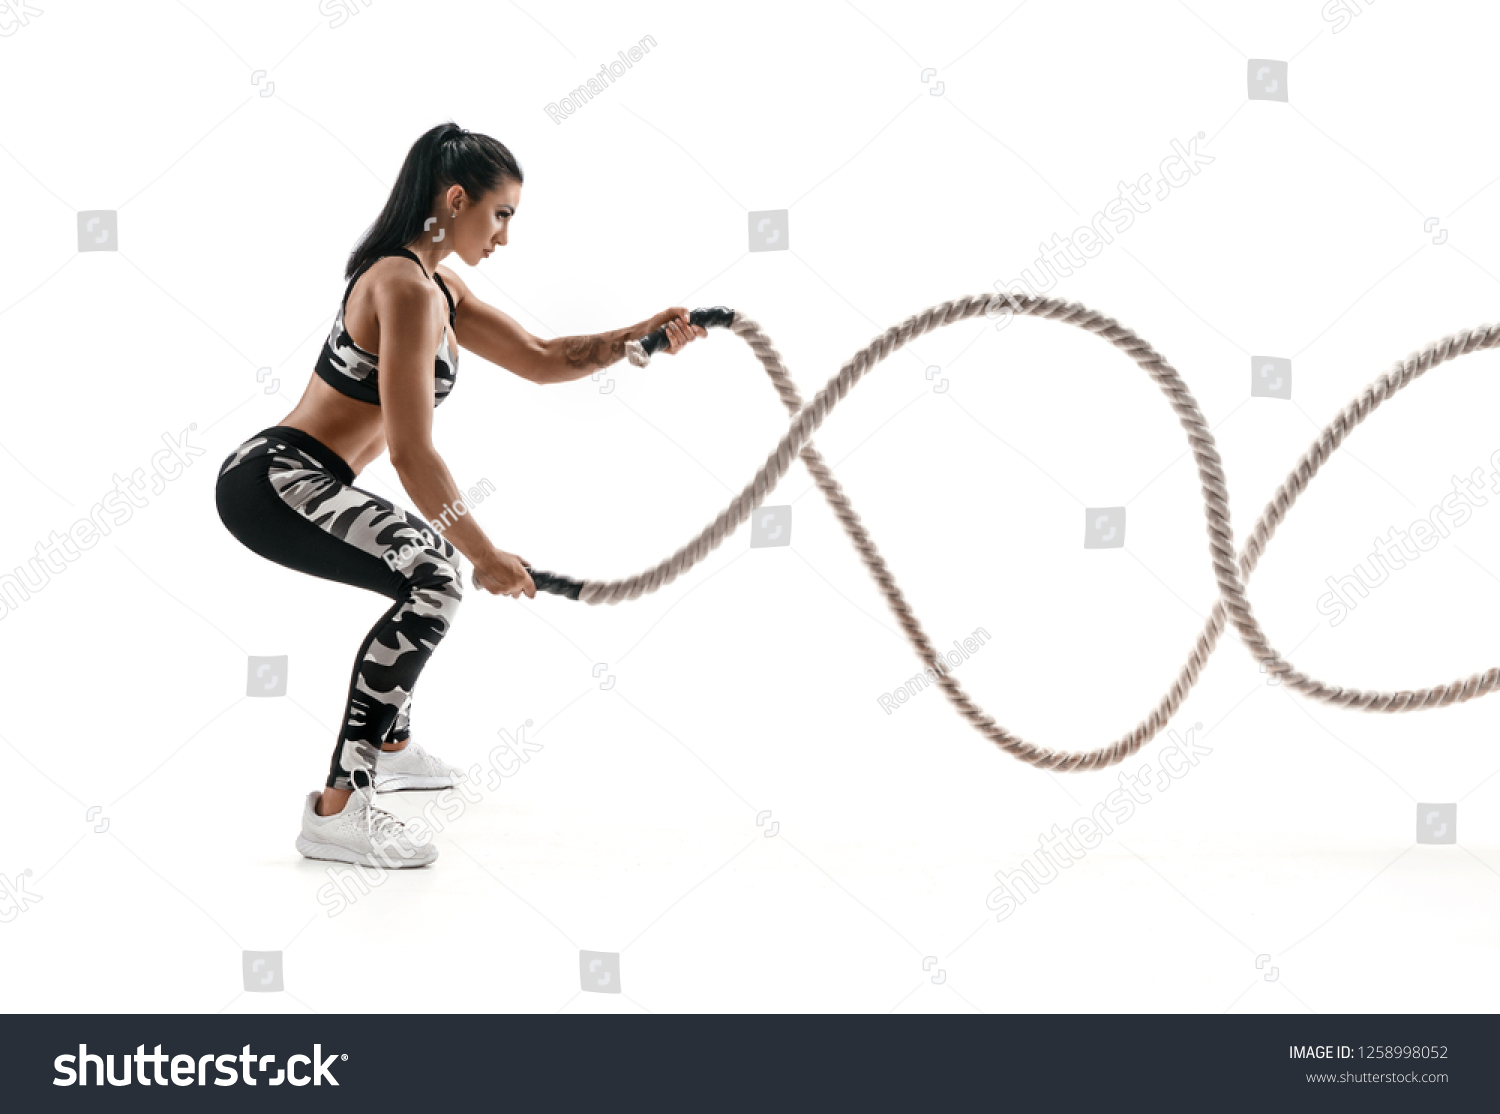 Strong muscular woman working out with battle ropes. Photo of attractive woman in fashionable sportswear isolated on white background. Strength and motivation. Side view. #1258998052